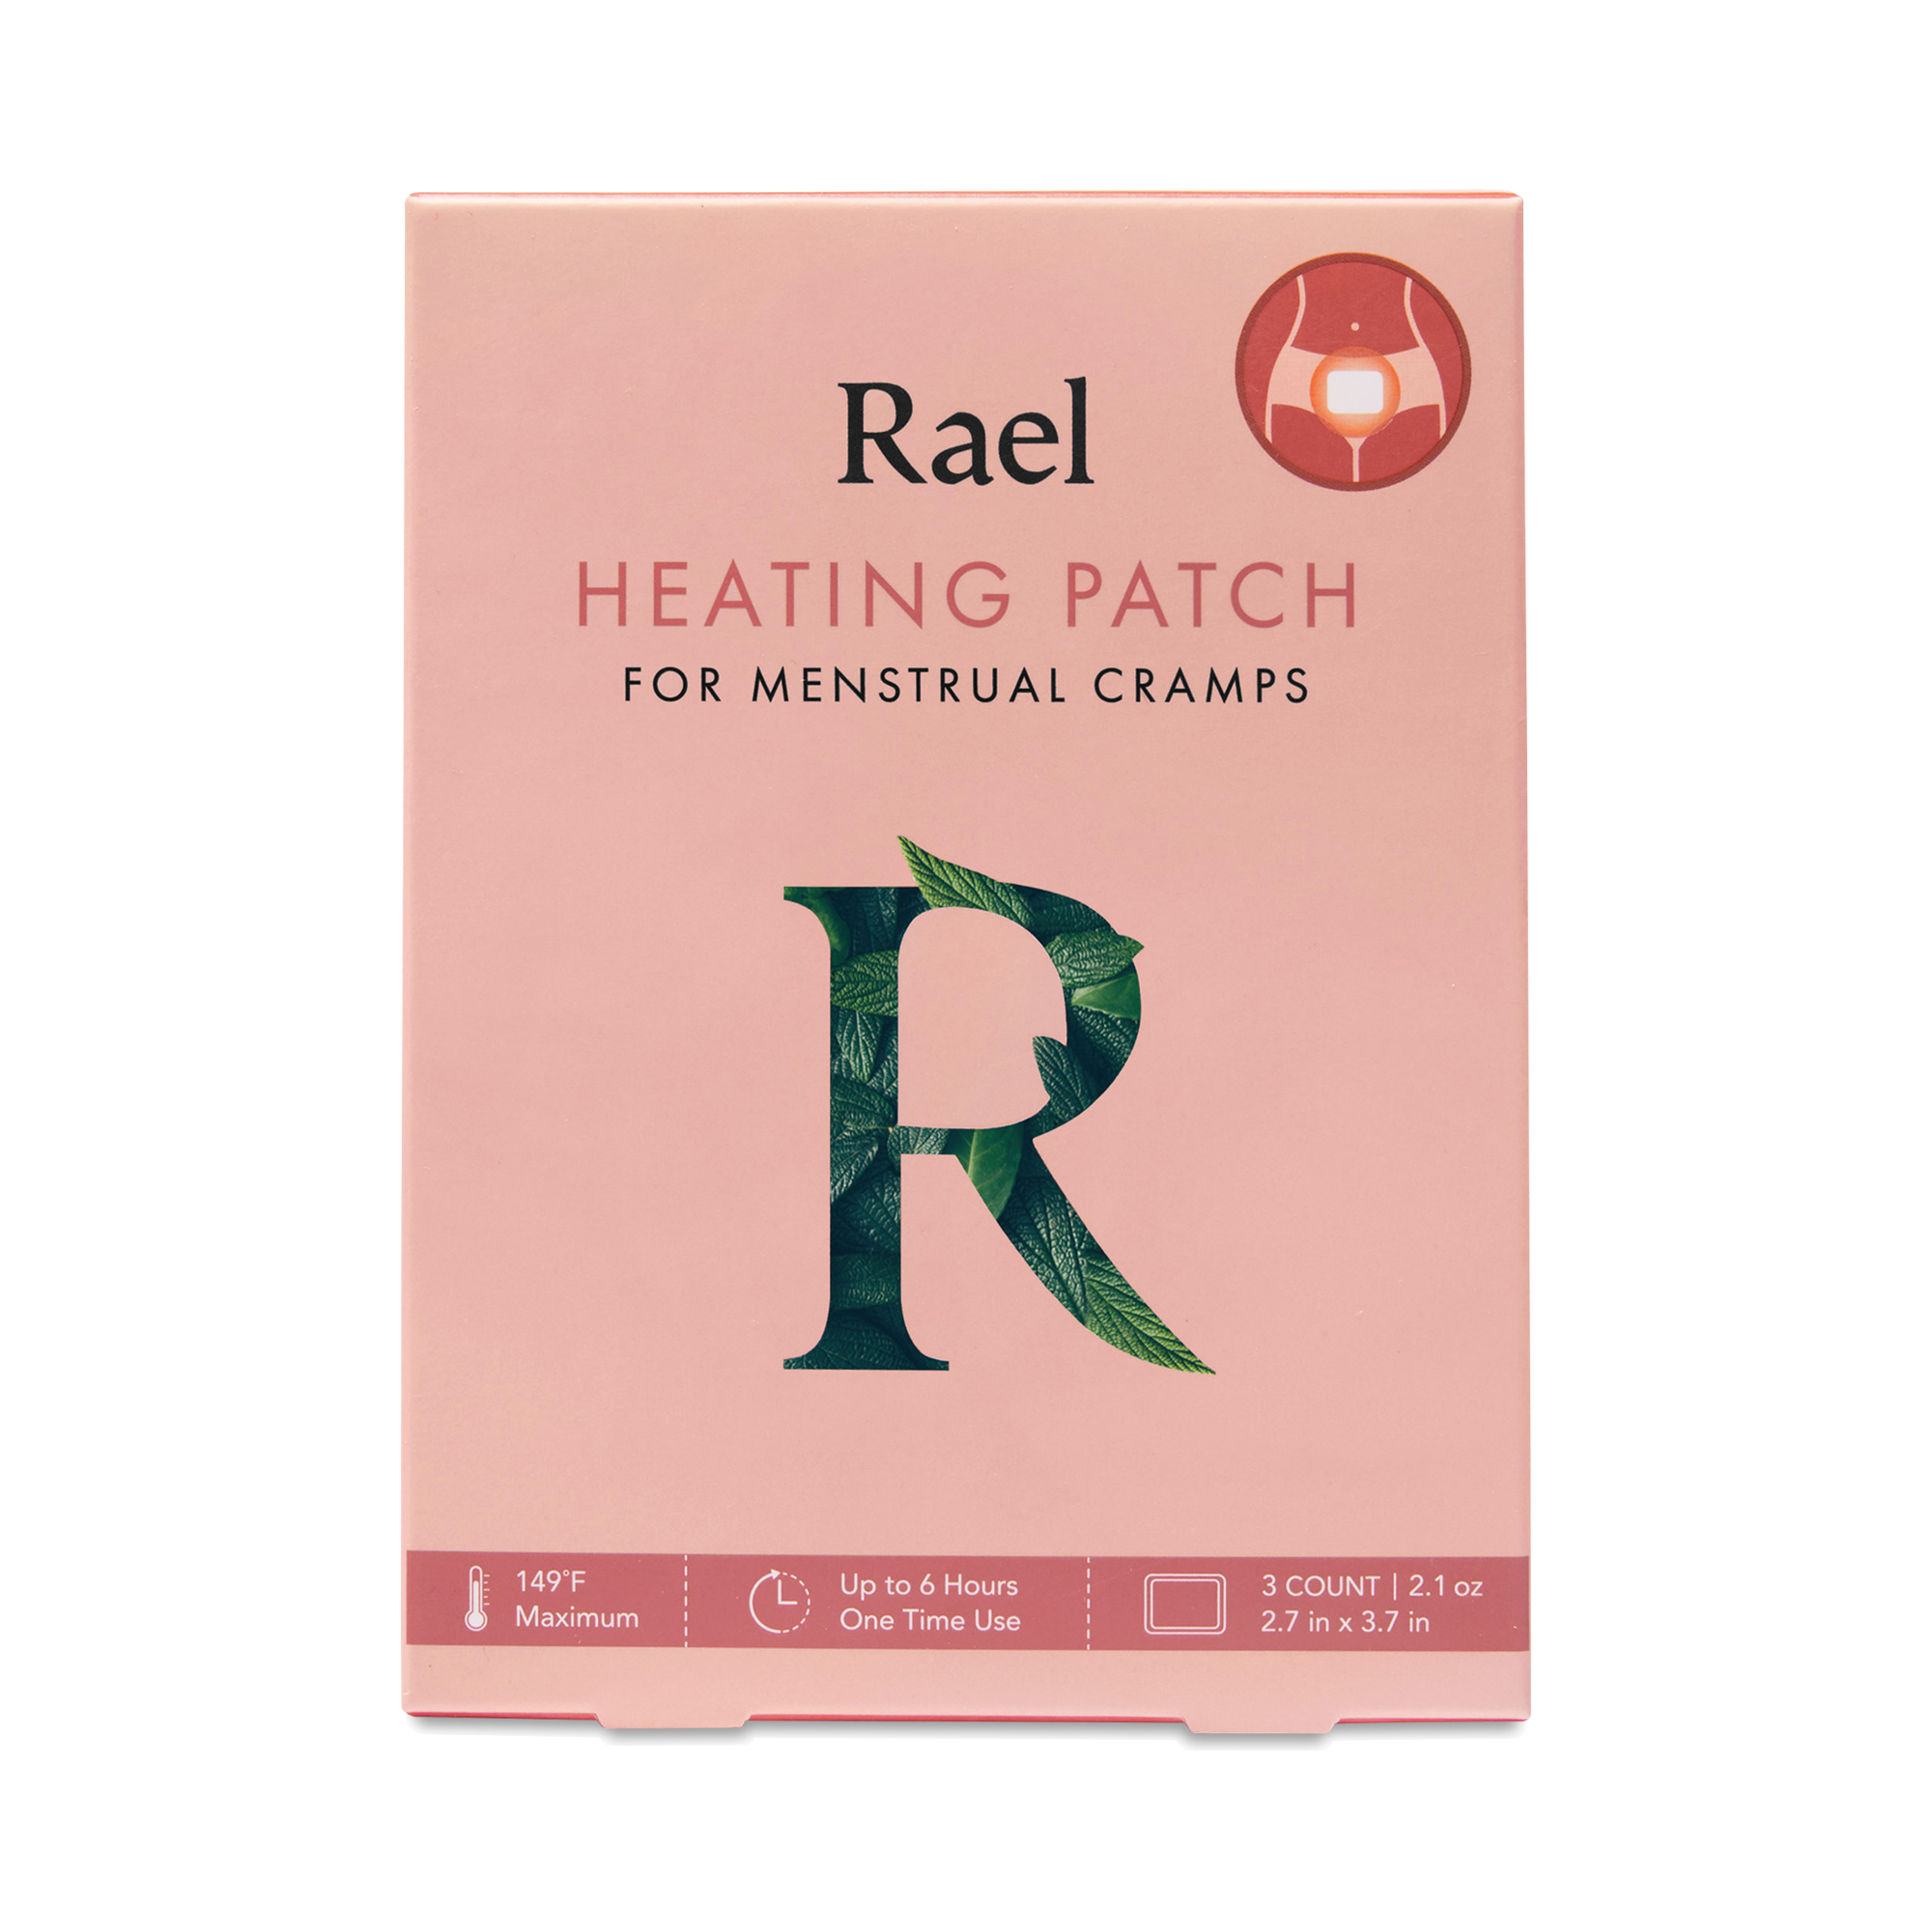 Rael Heating Patch for Menstrual Cramps 3 count box